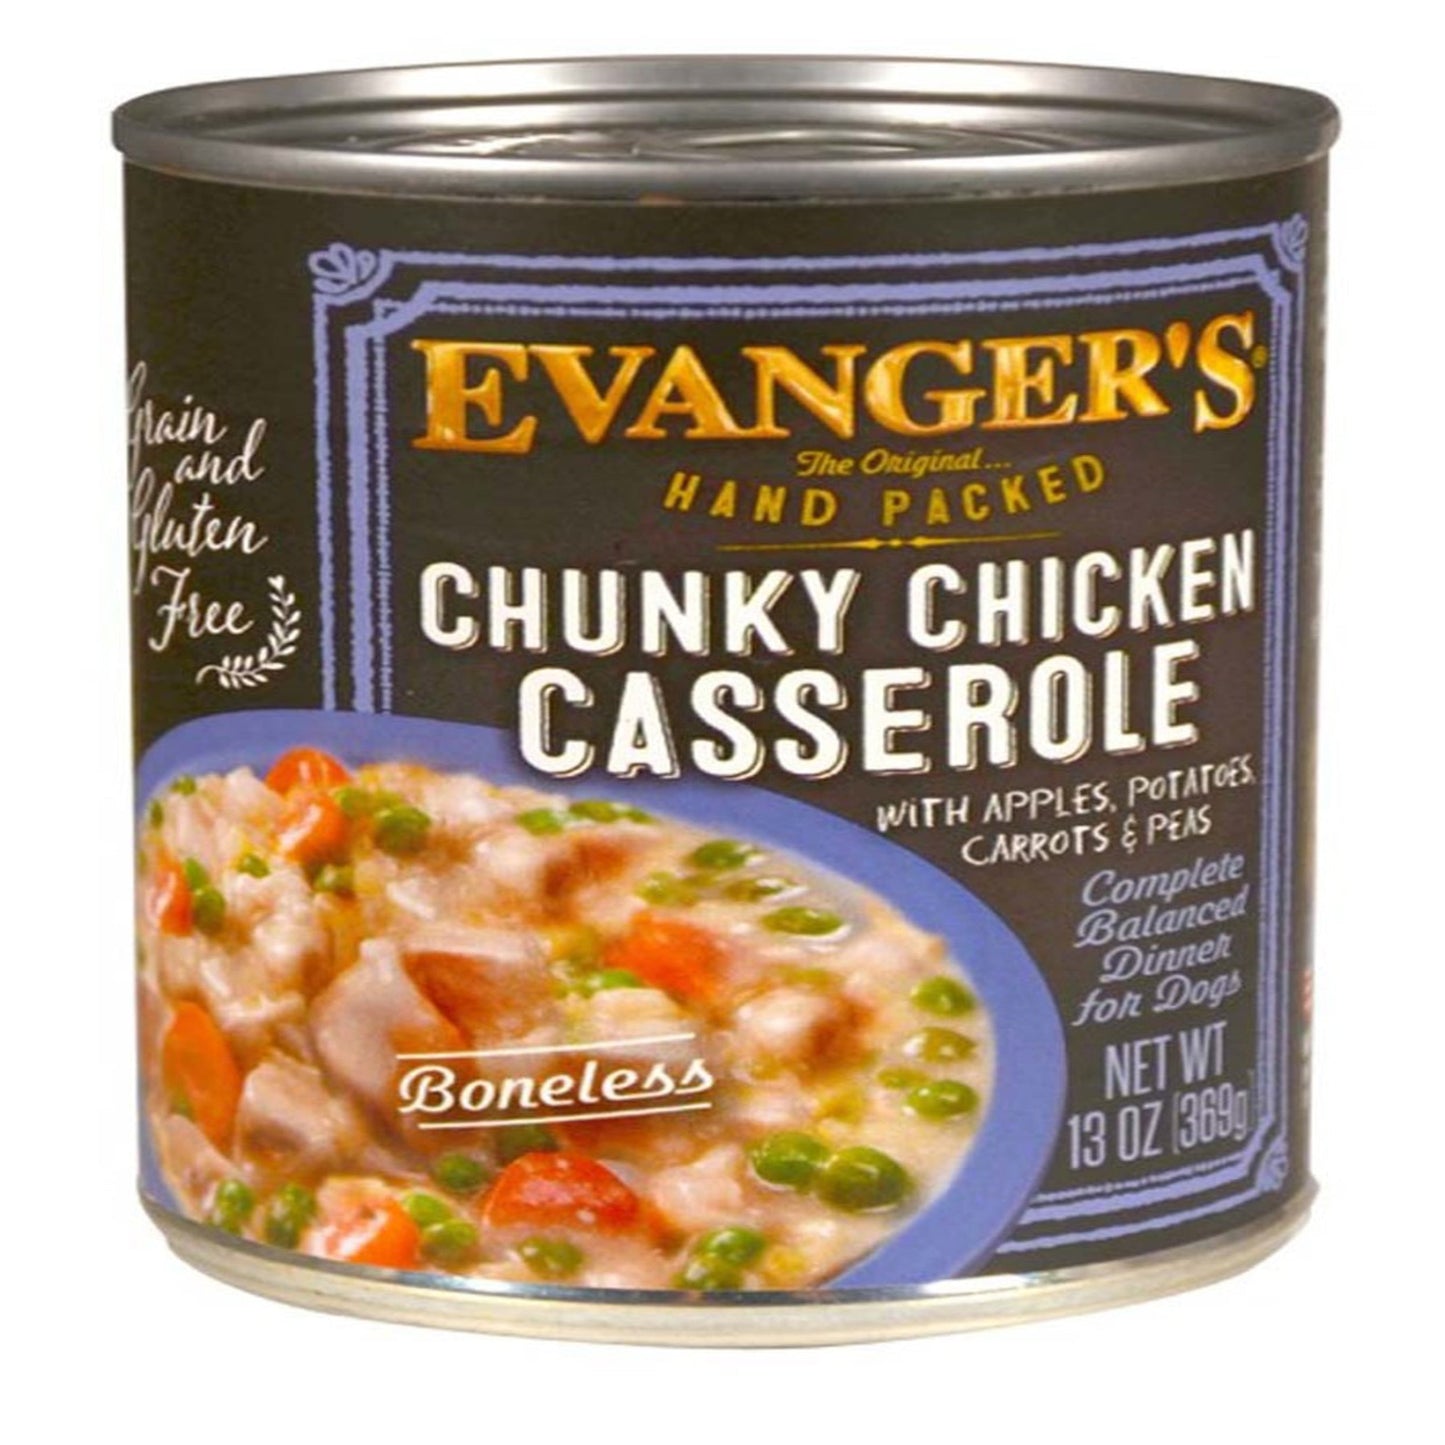 Evanger's Hand Packed Wet Dog Food Chunky Chicken Casserole12oz. (Case of 12)